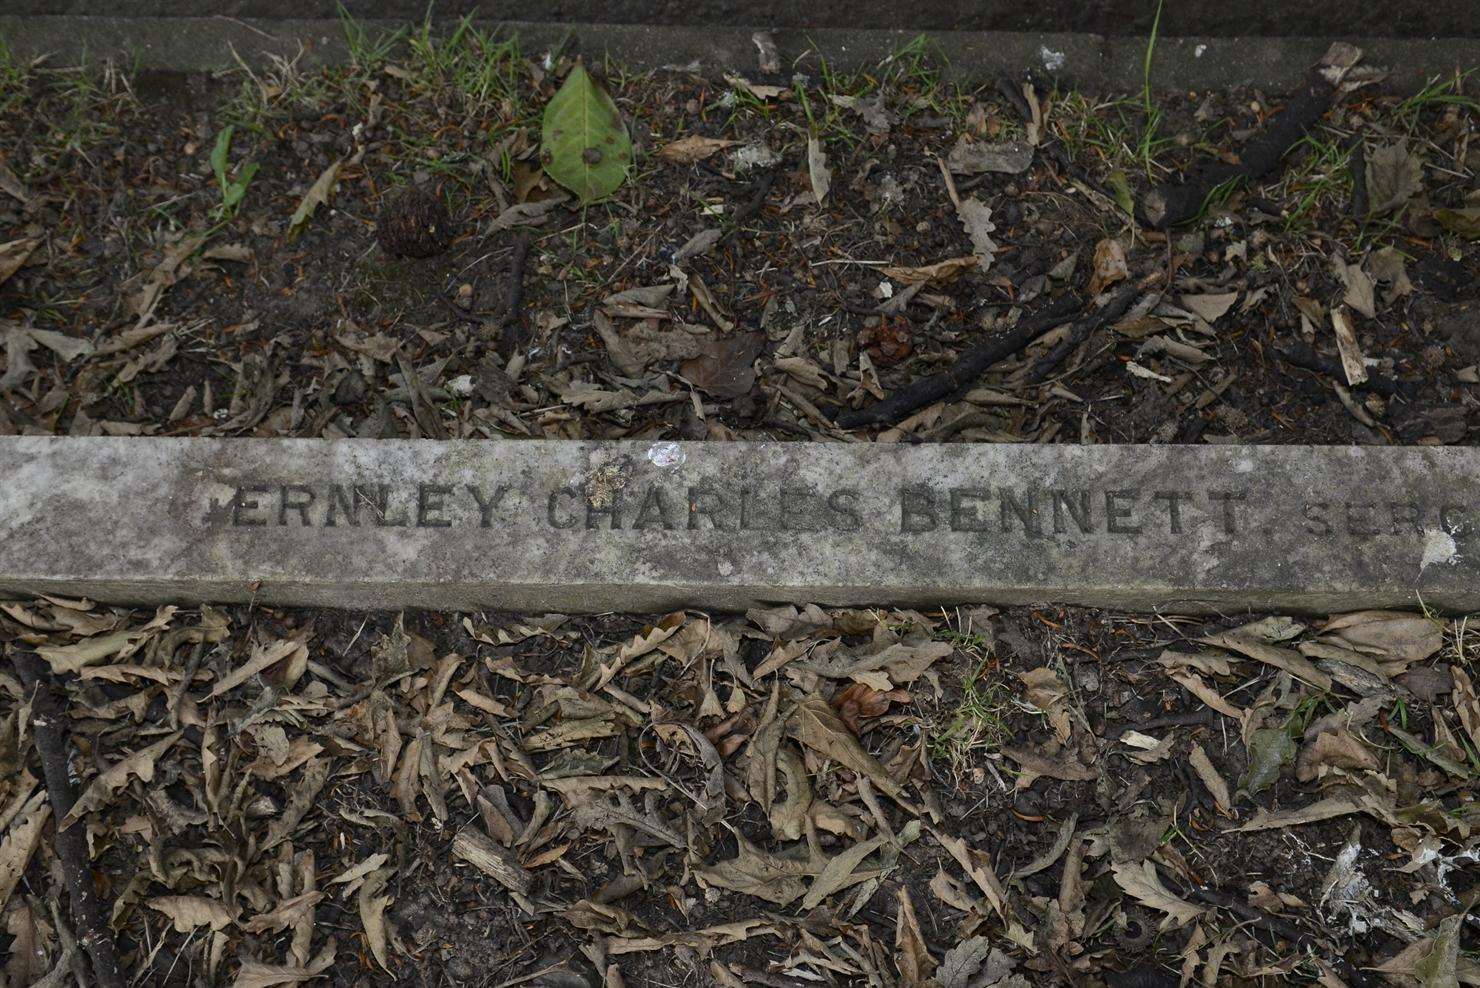 Part of the inscription on the grave of Ernley Charles Bennett, of the 2nd Battalion Royal West Kents, in Sittingbourne Cemetery